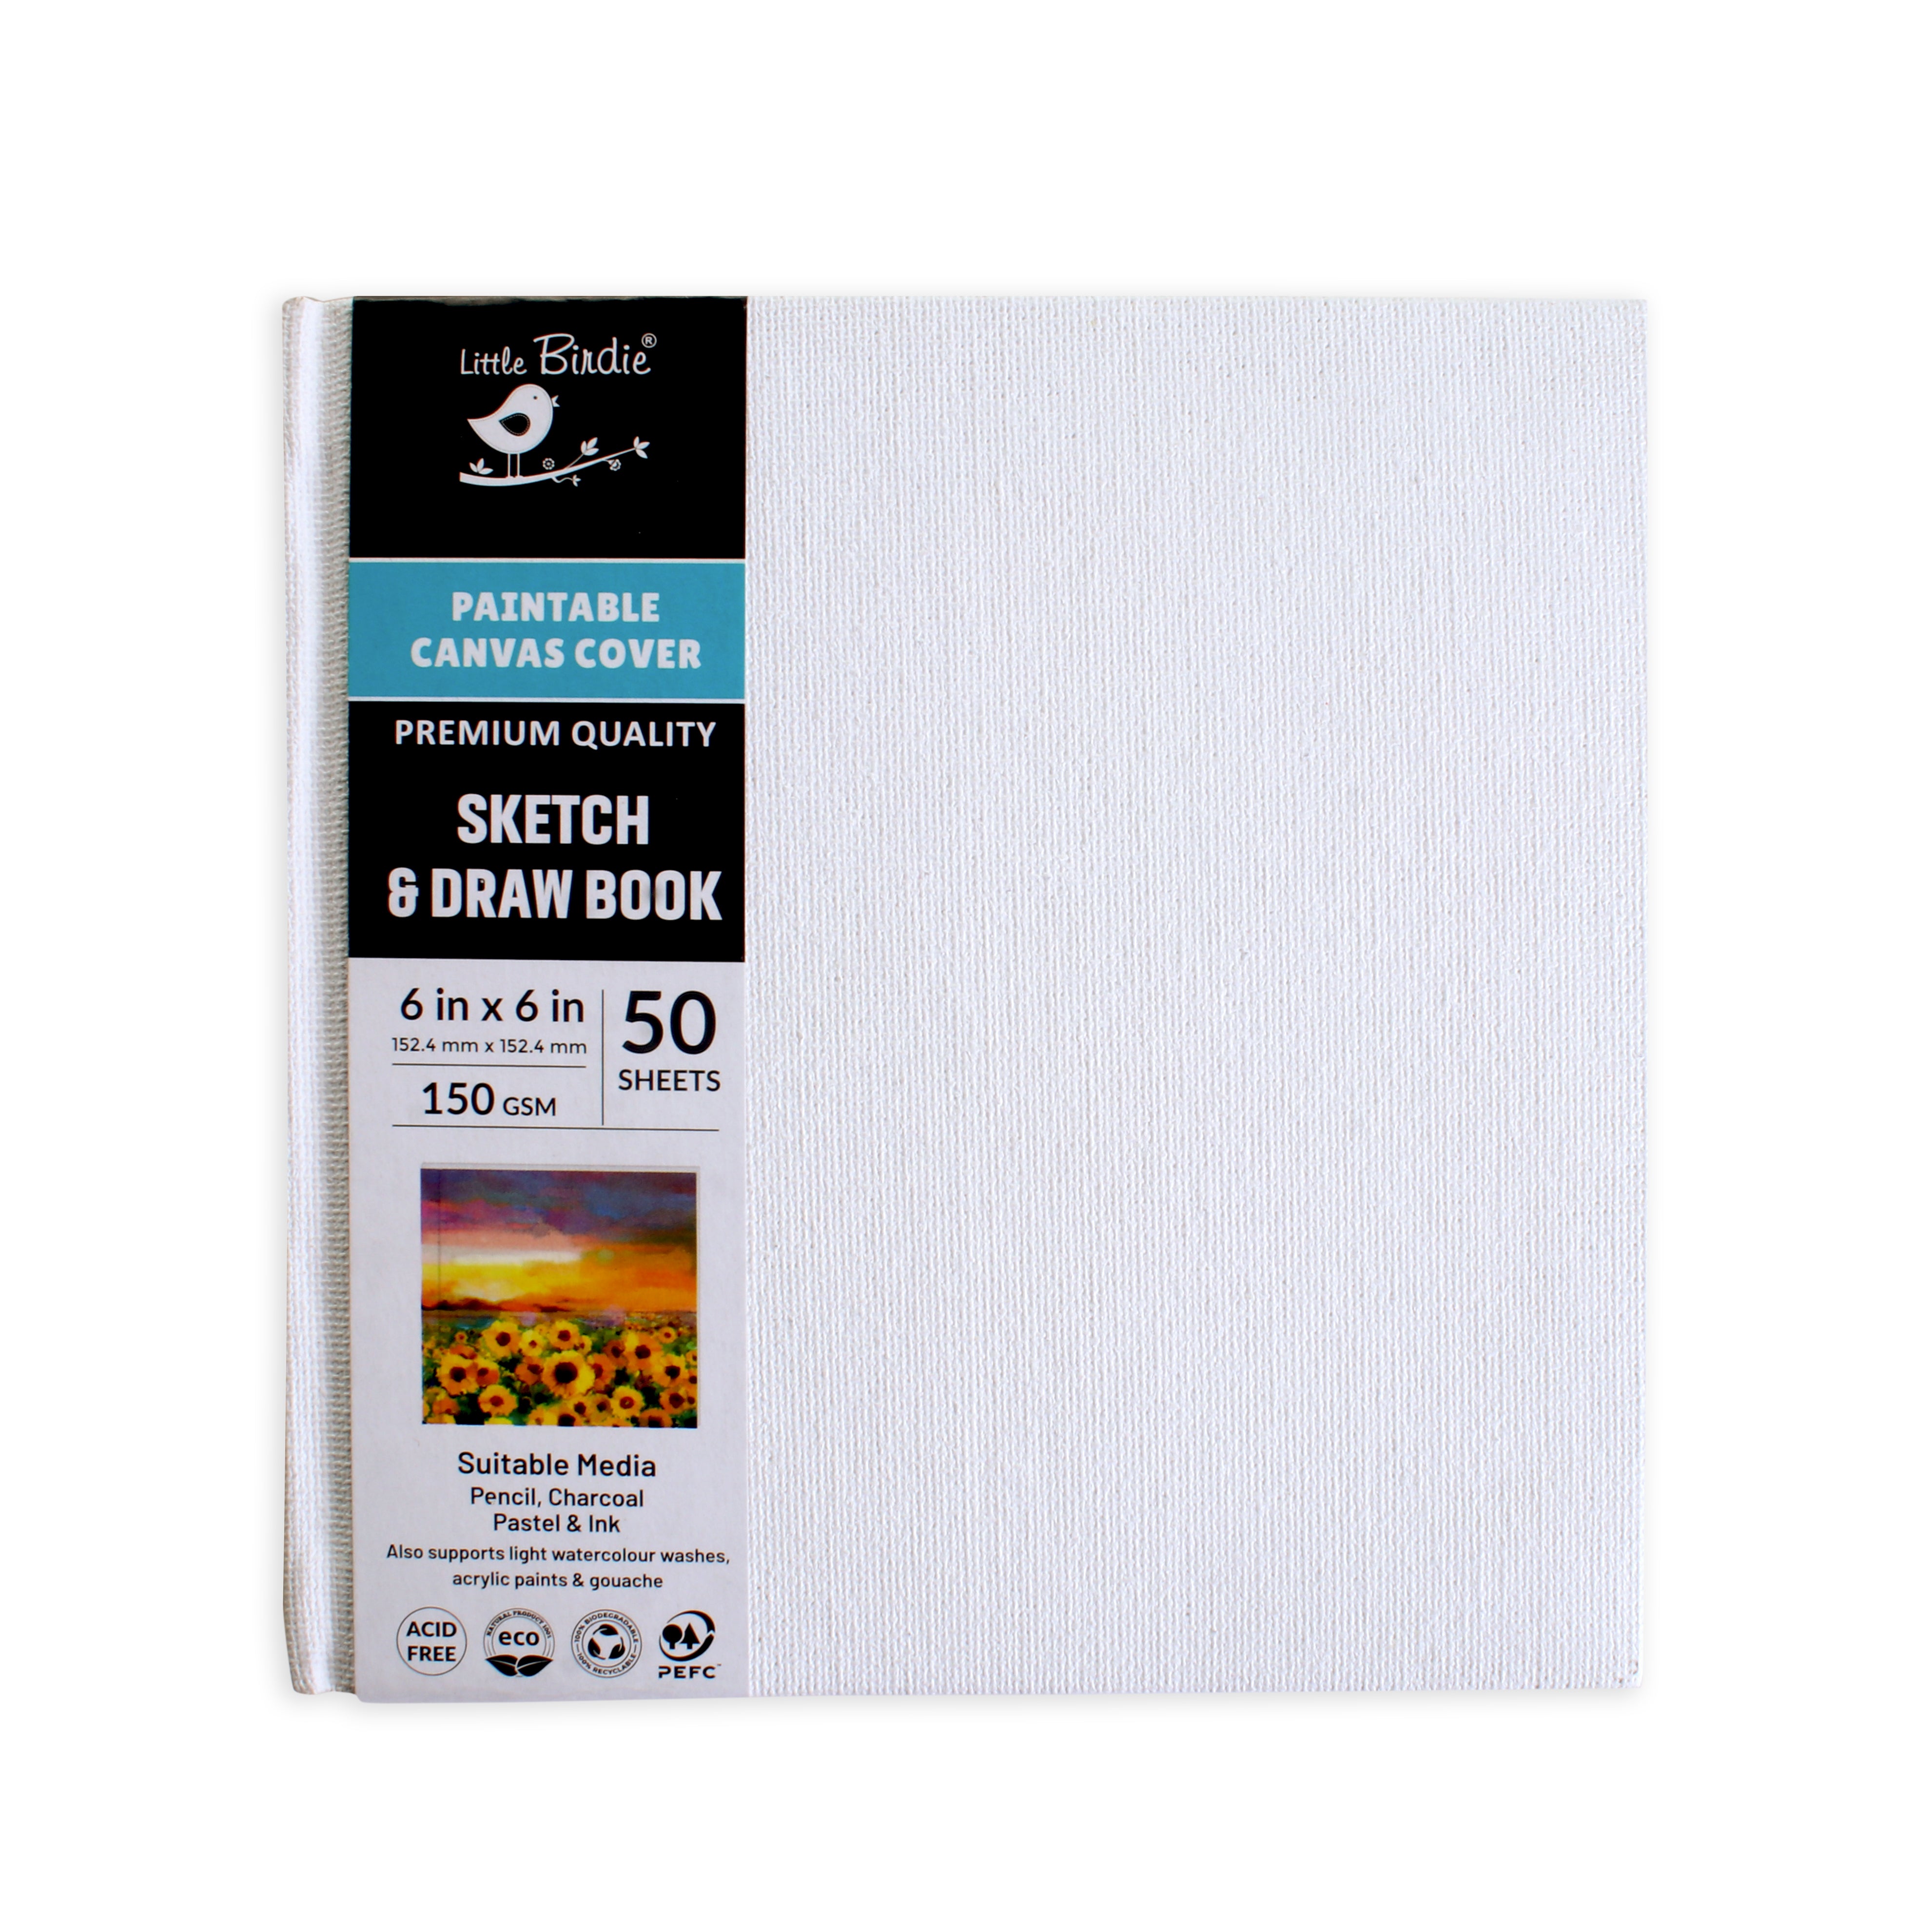 Paintable Canvas Cover Sketch and Draw Book, Hard Cover, 6in x 6in, 150gsm, 50 sheets